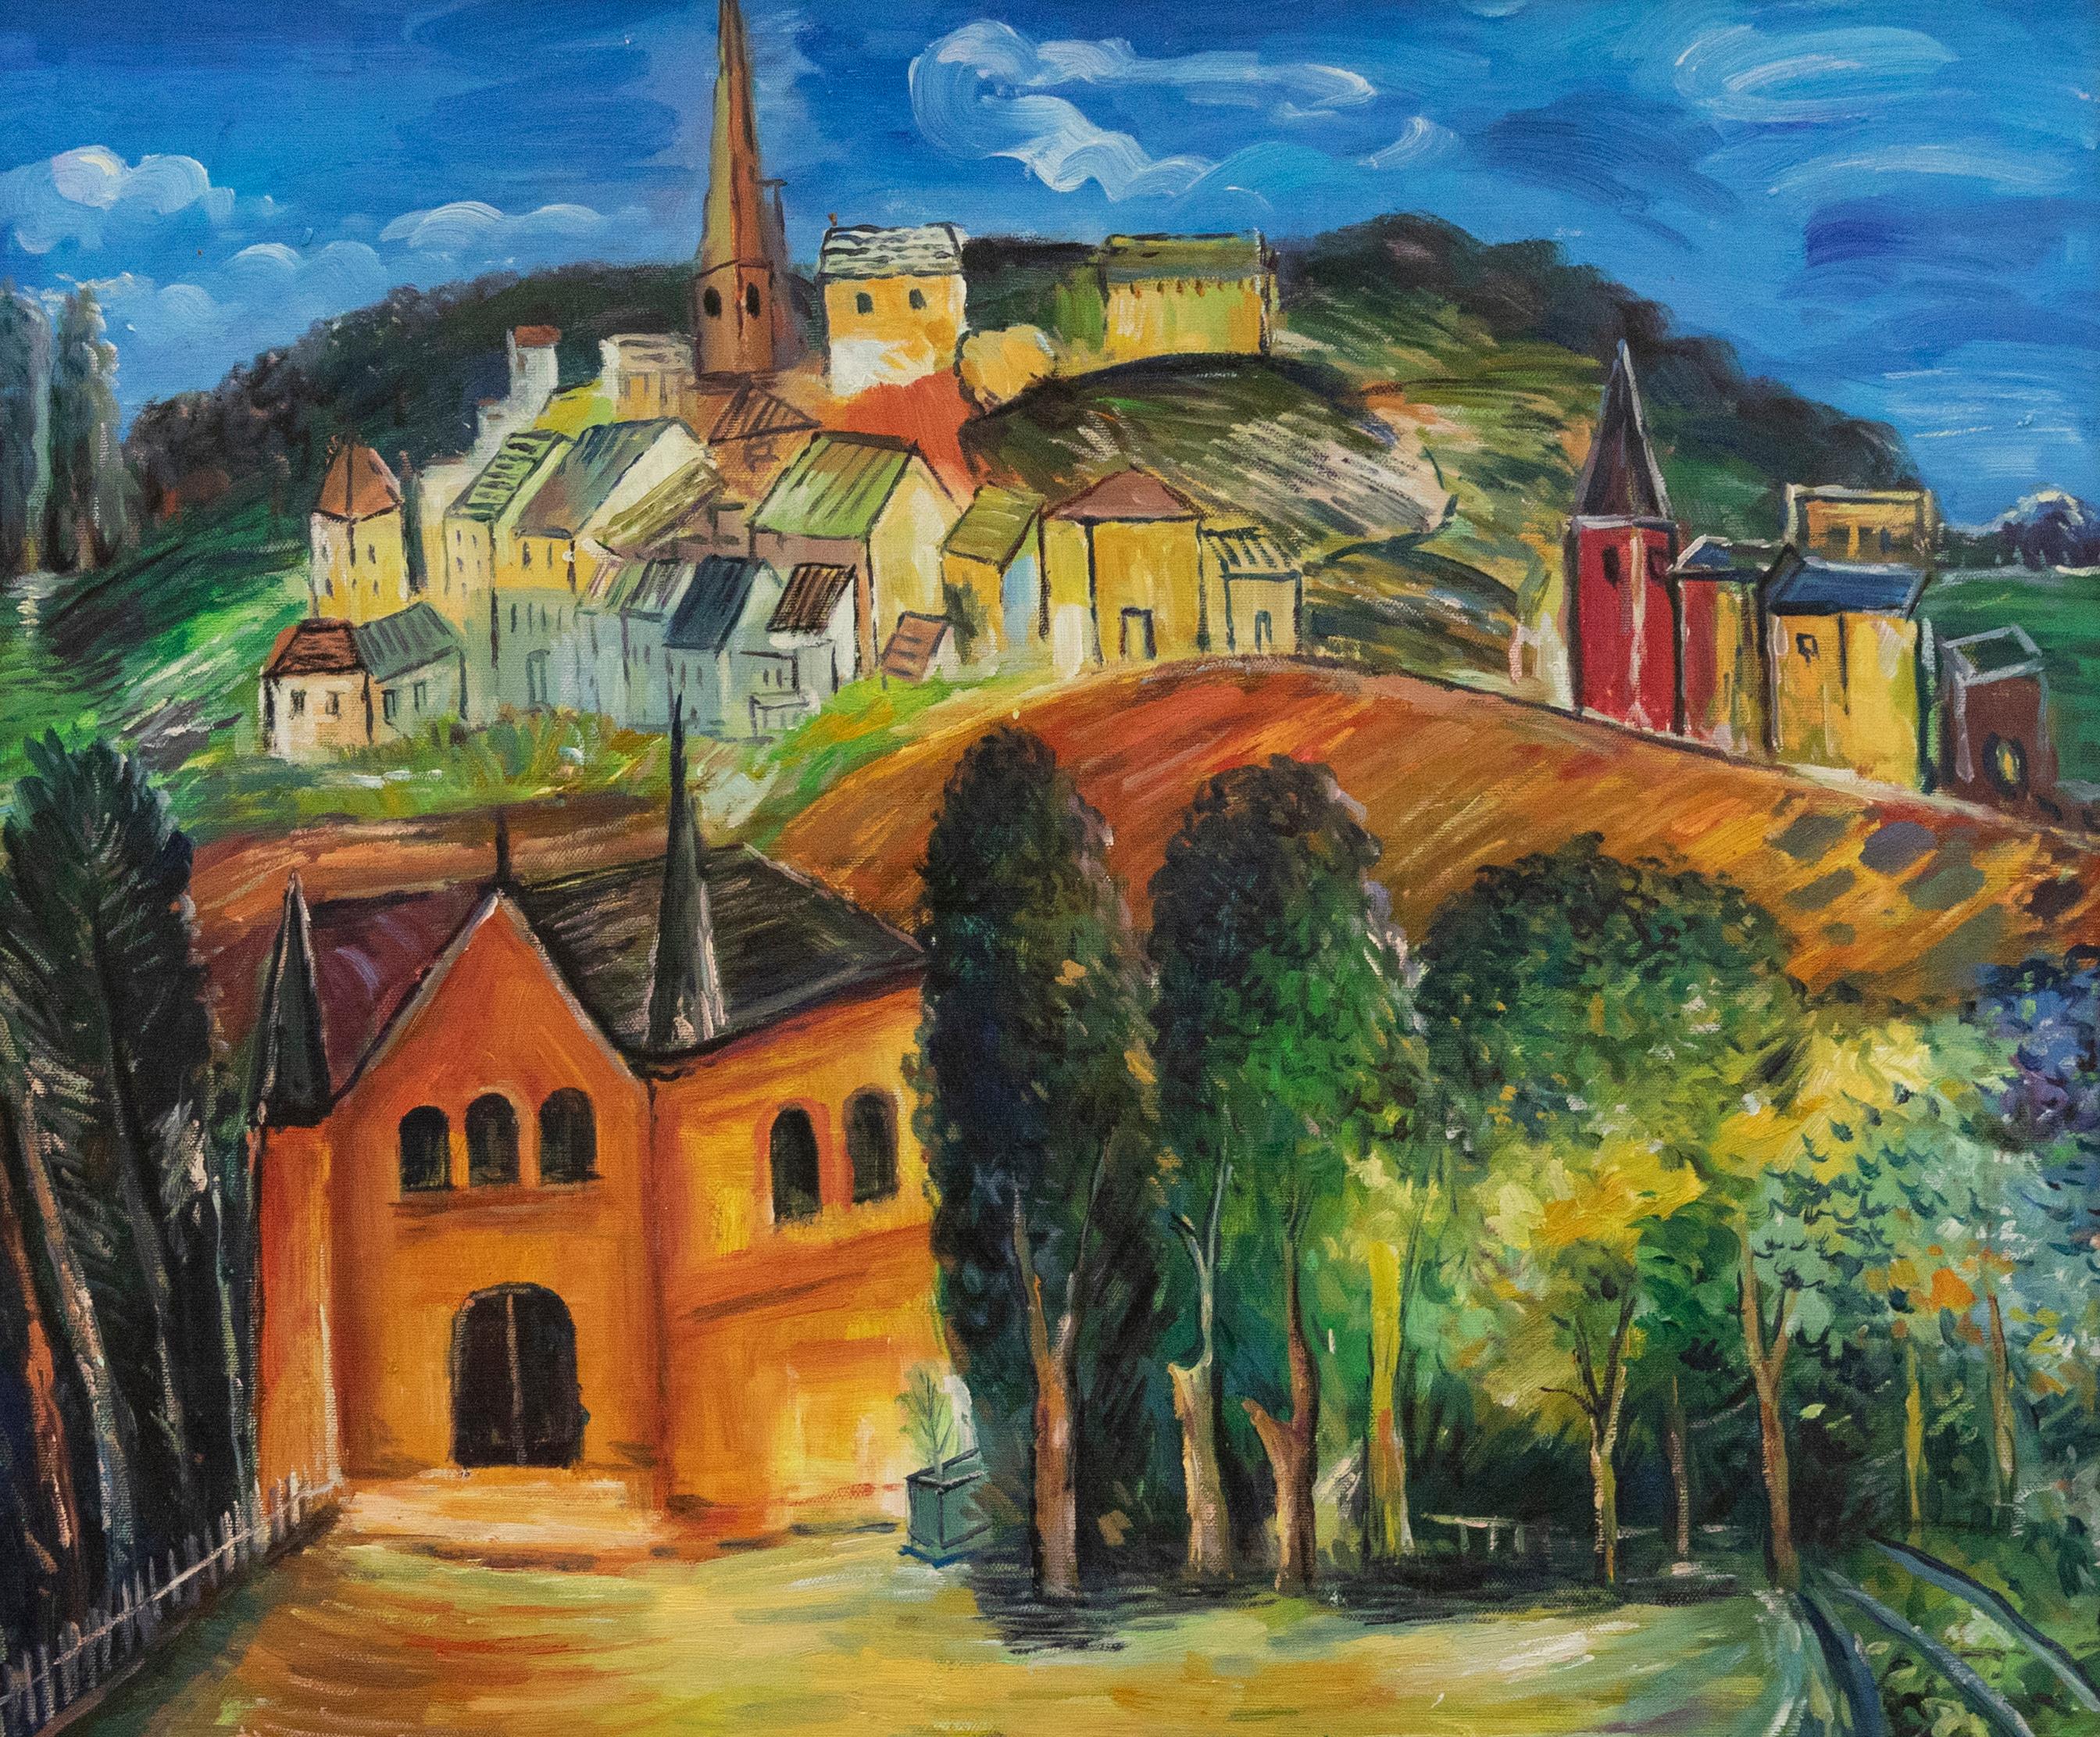 20th Century Oil, Road to the Hilltop Village - Painting by Unknown